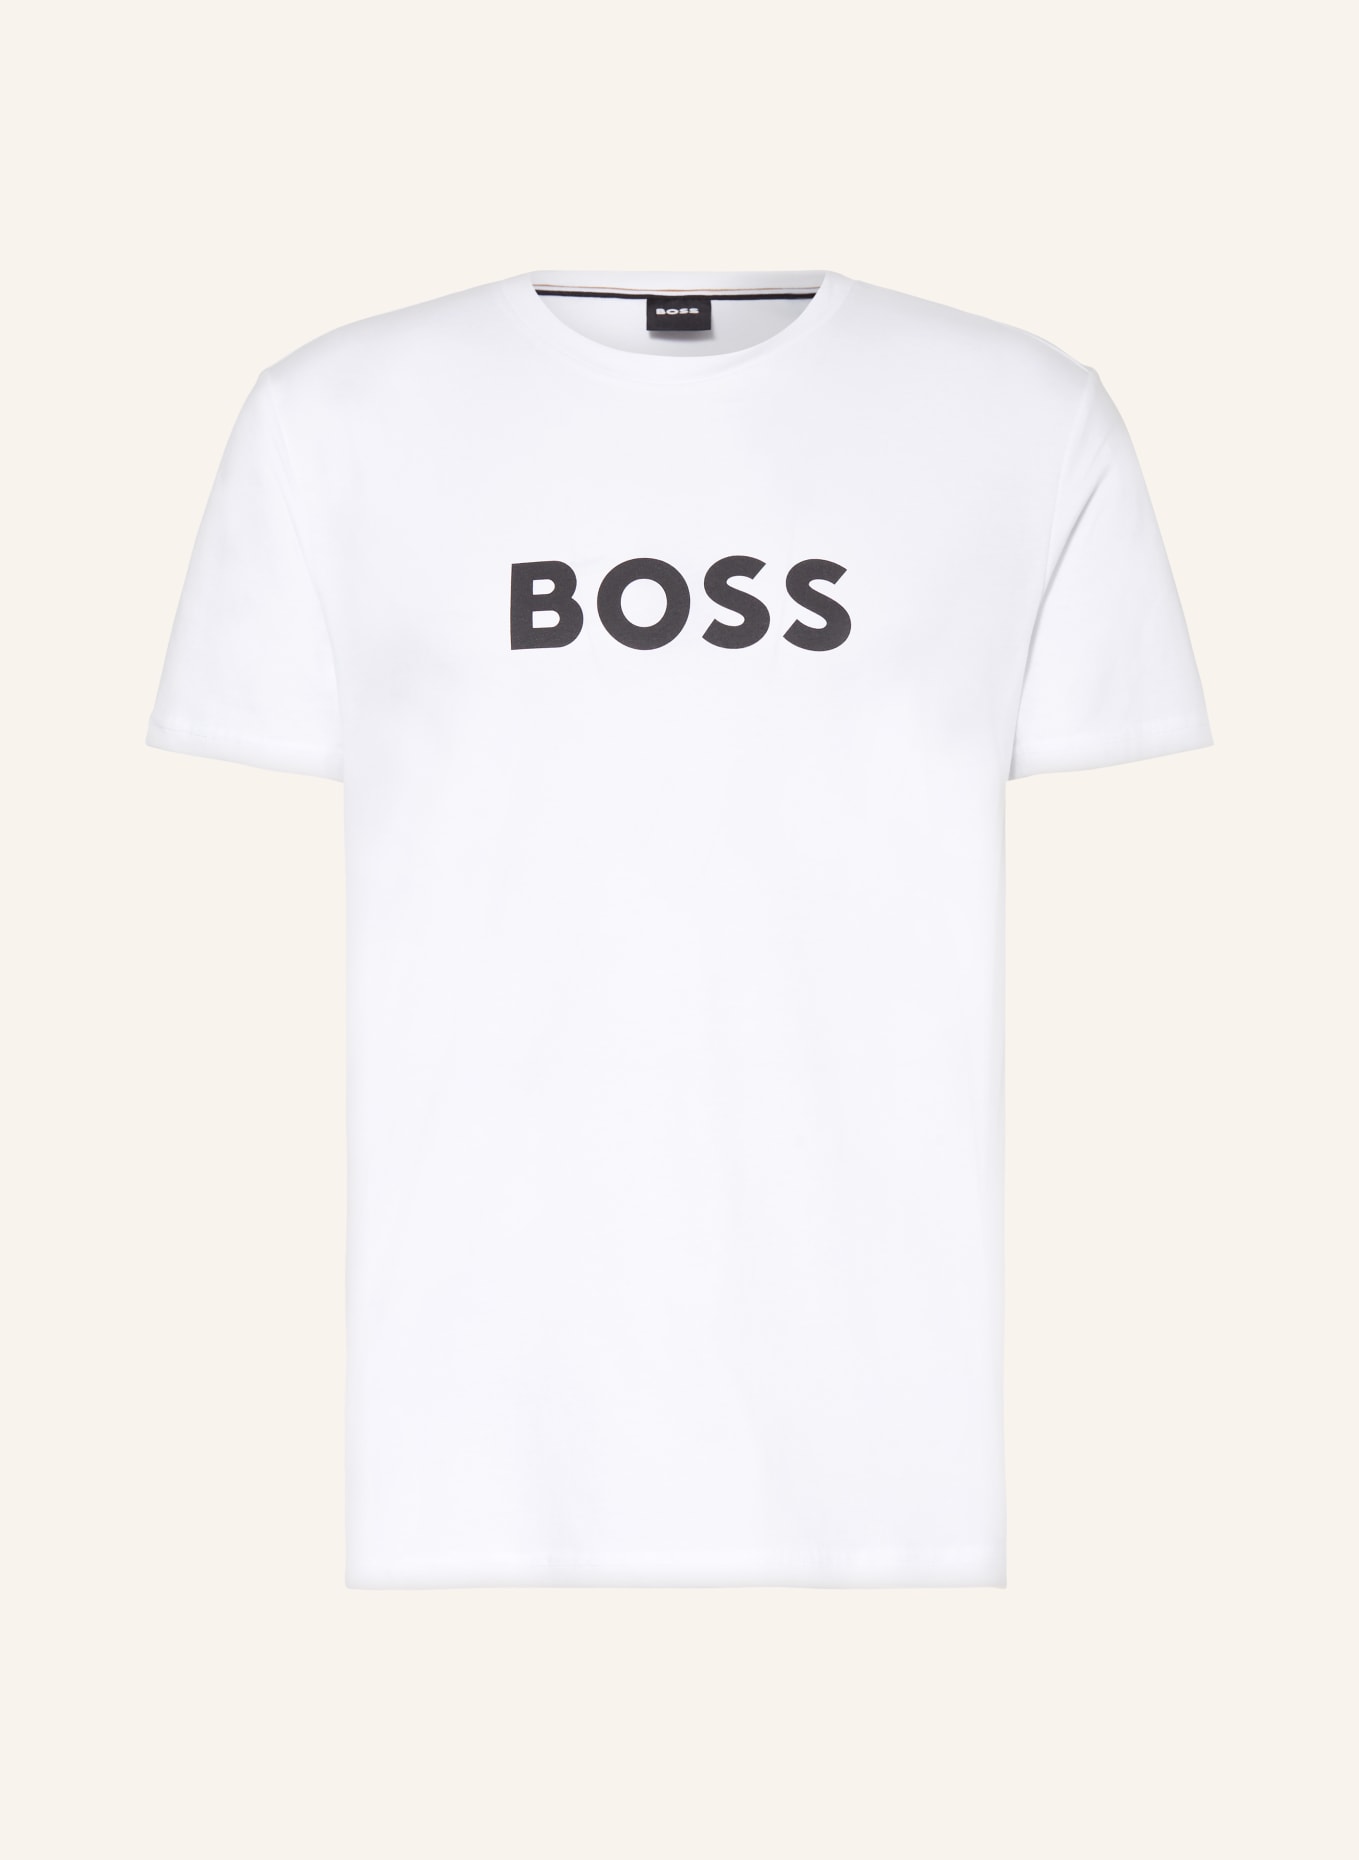 BOSS UV shirt with UV protection 50+, Color: WHITE (Image 1)